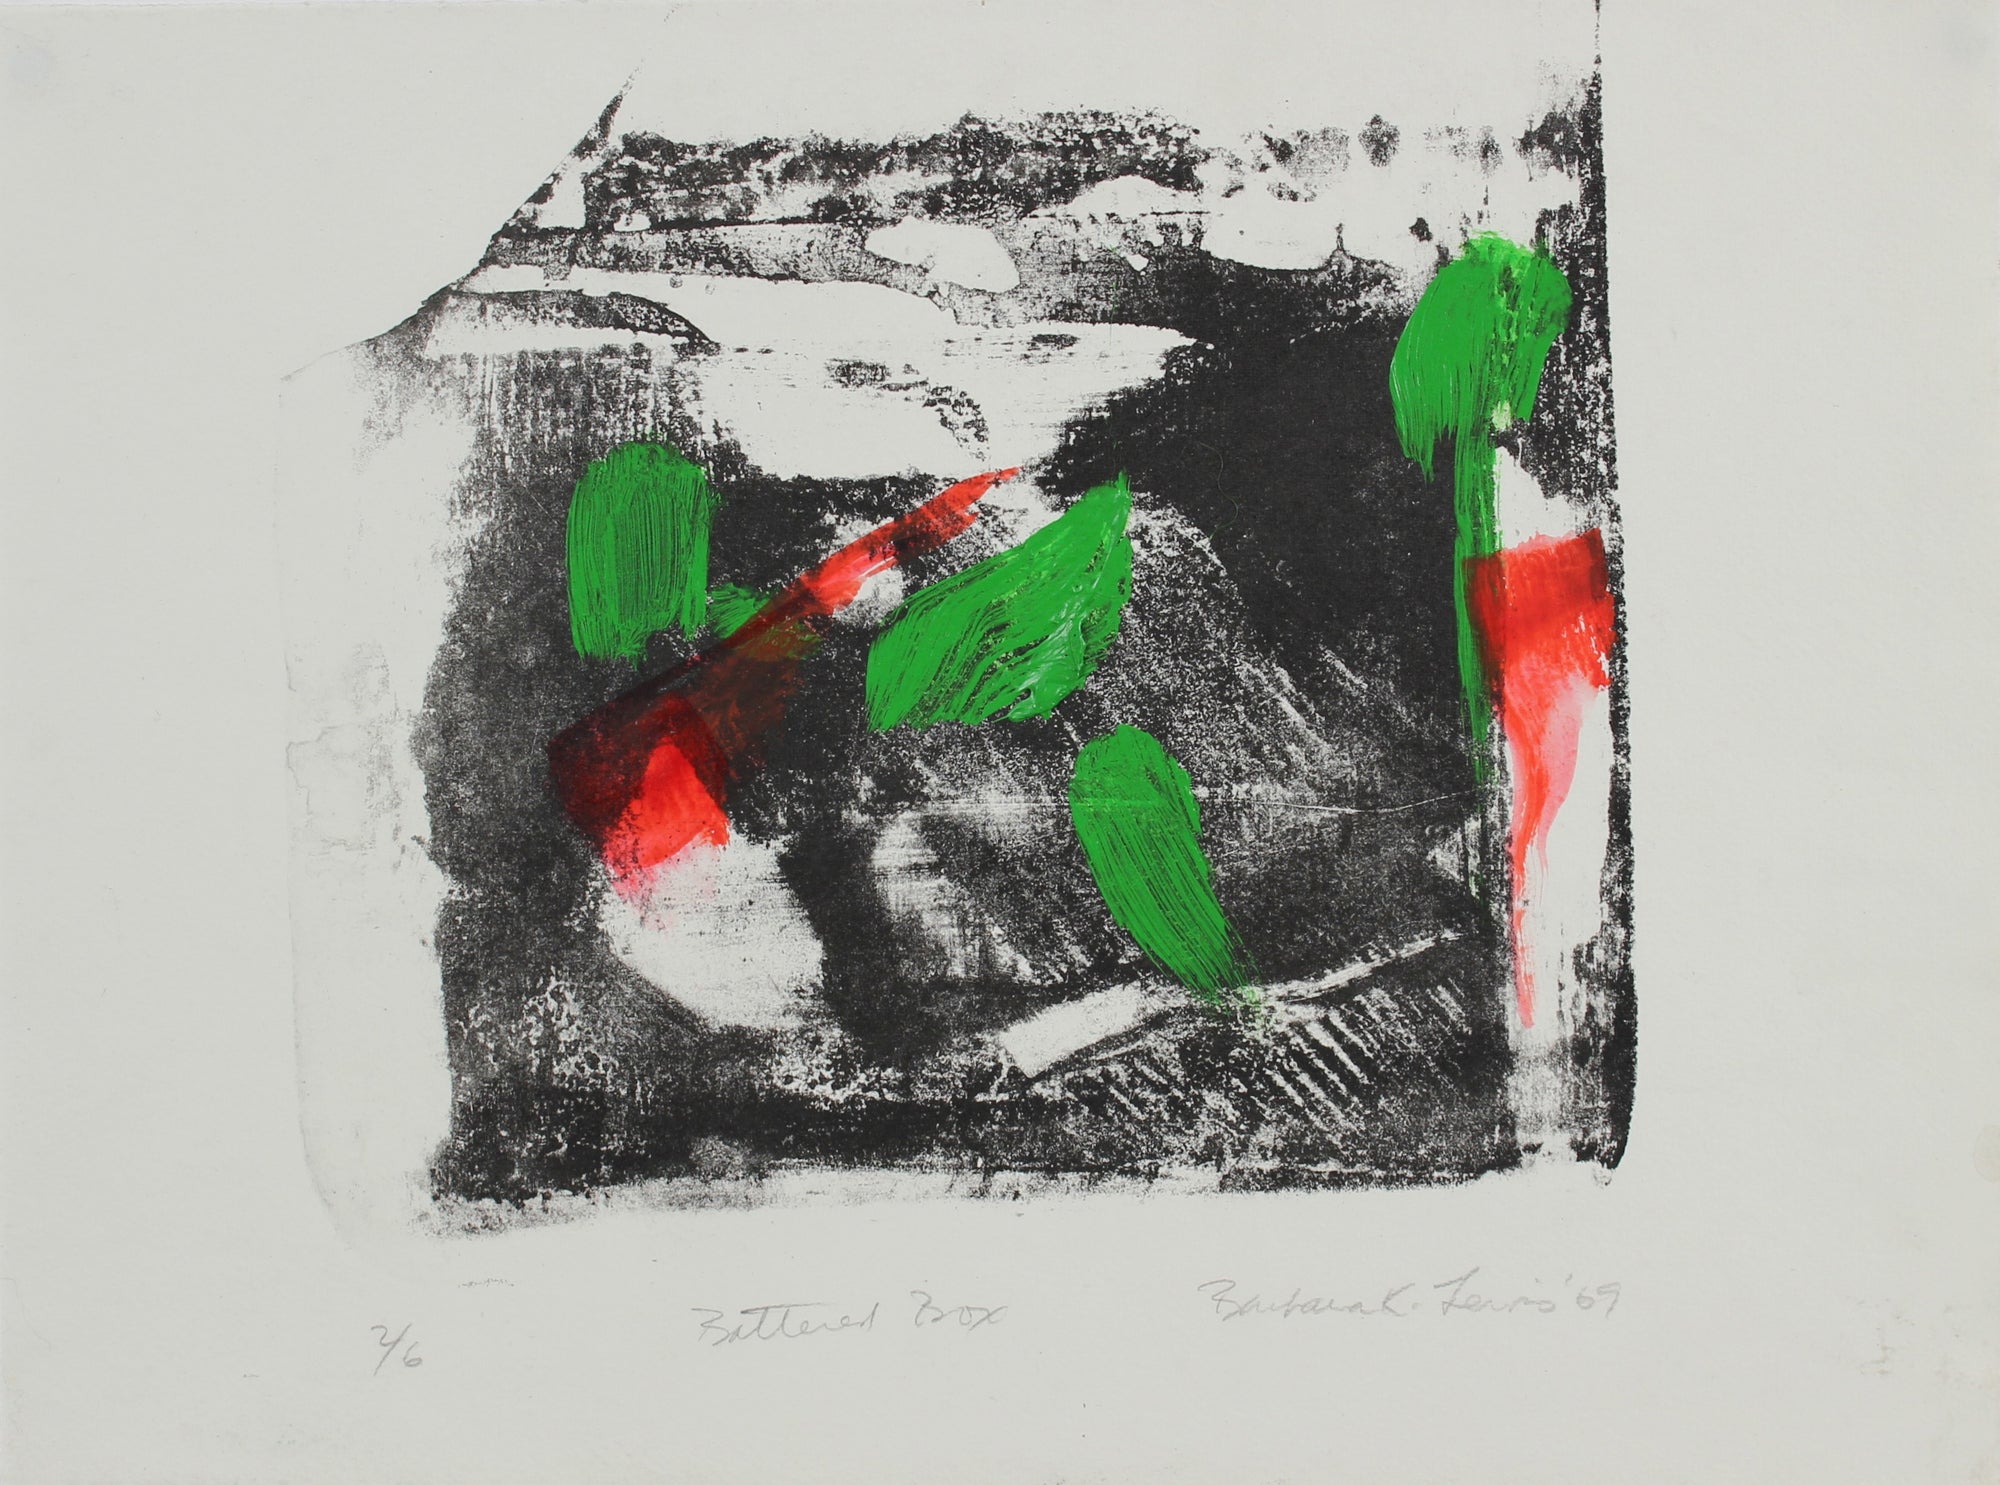 <I>Battered Box</I> <br>1969 Lithograph & Acrylic<br><br>#99069